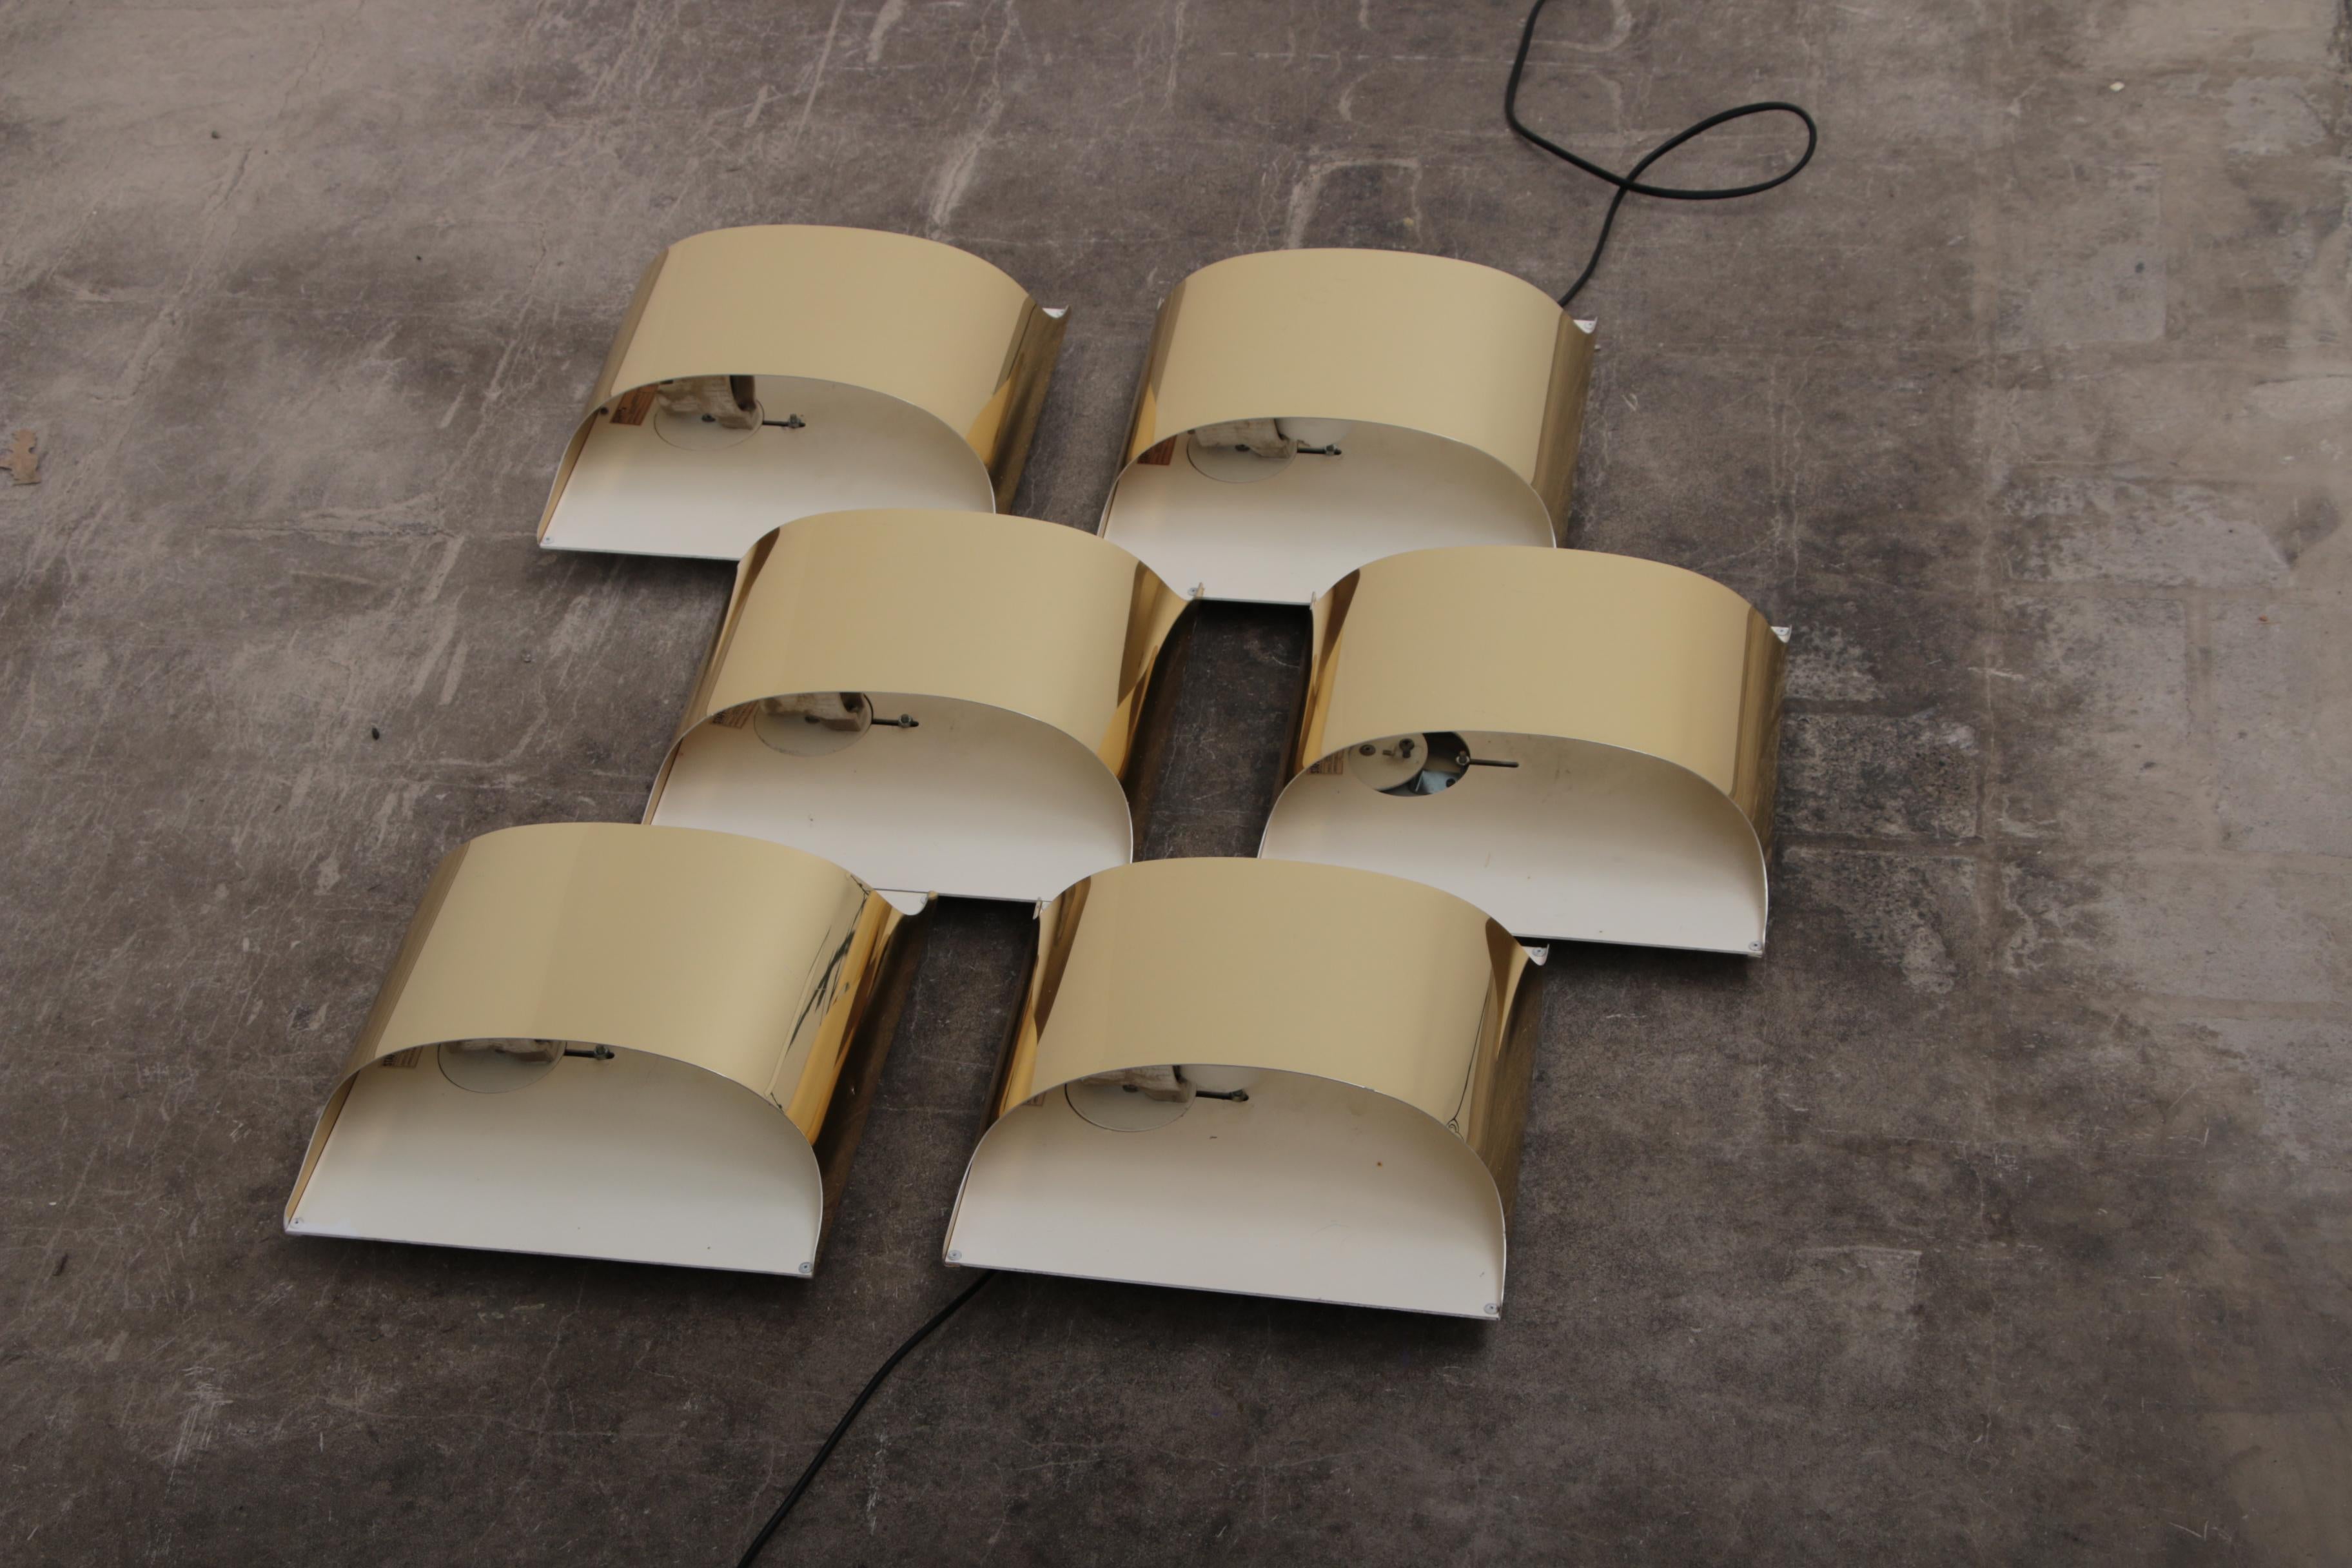 6 Staff Leuchten Germany Gold Plate wall lamps design from 1968 For Sale 5